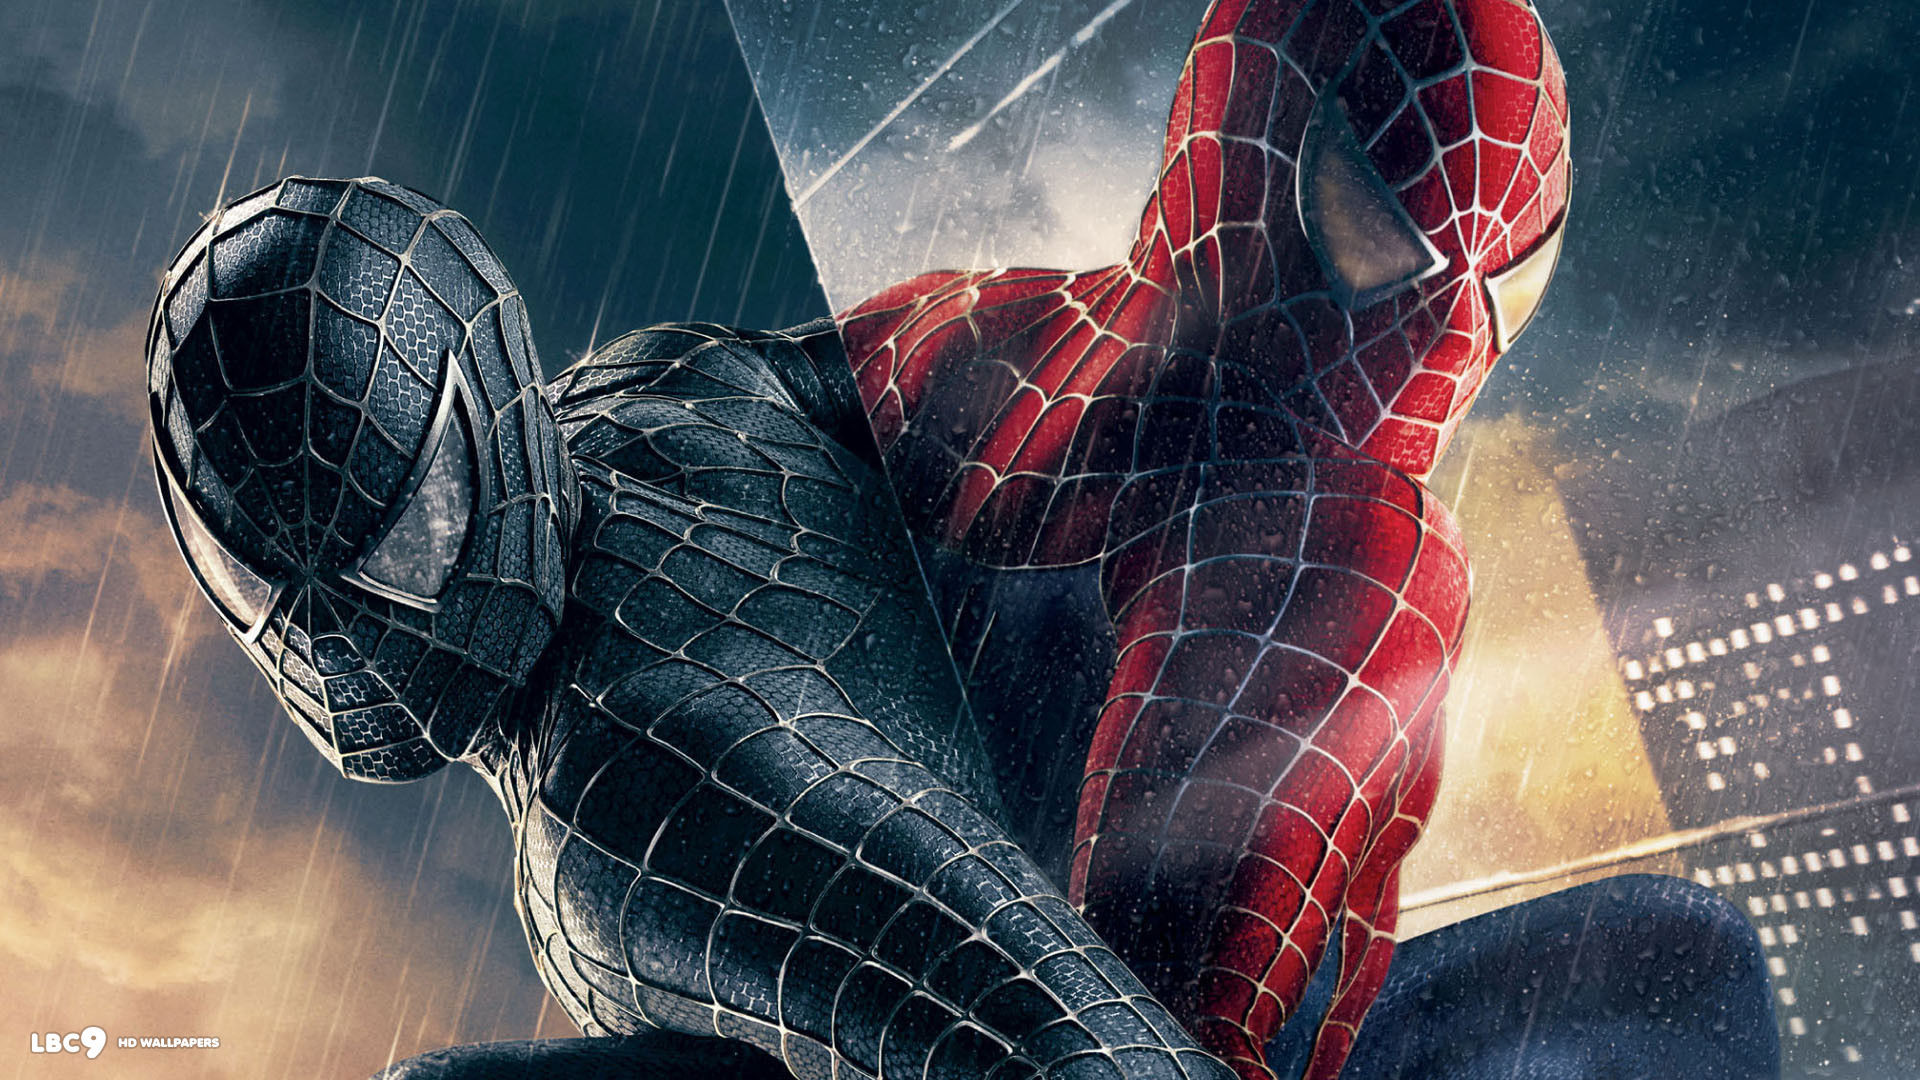 Spiderman wallpapers 1080p movie 35754poster